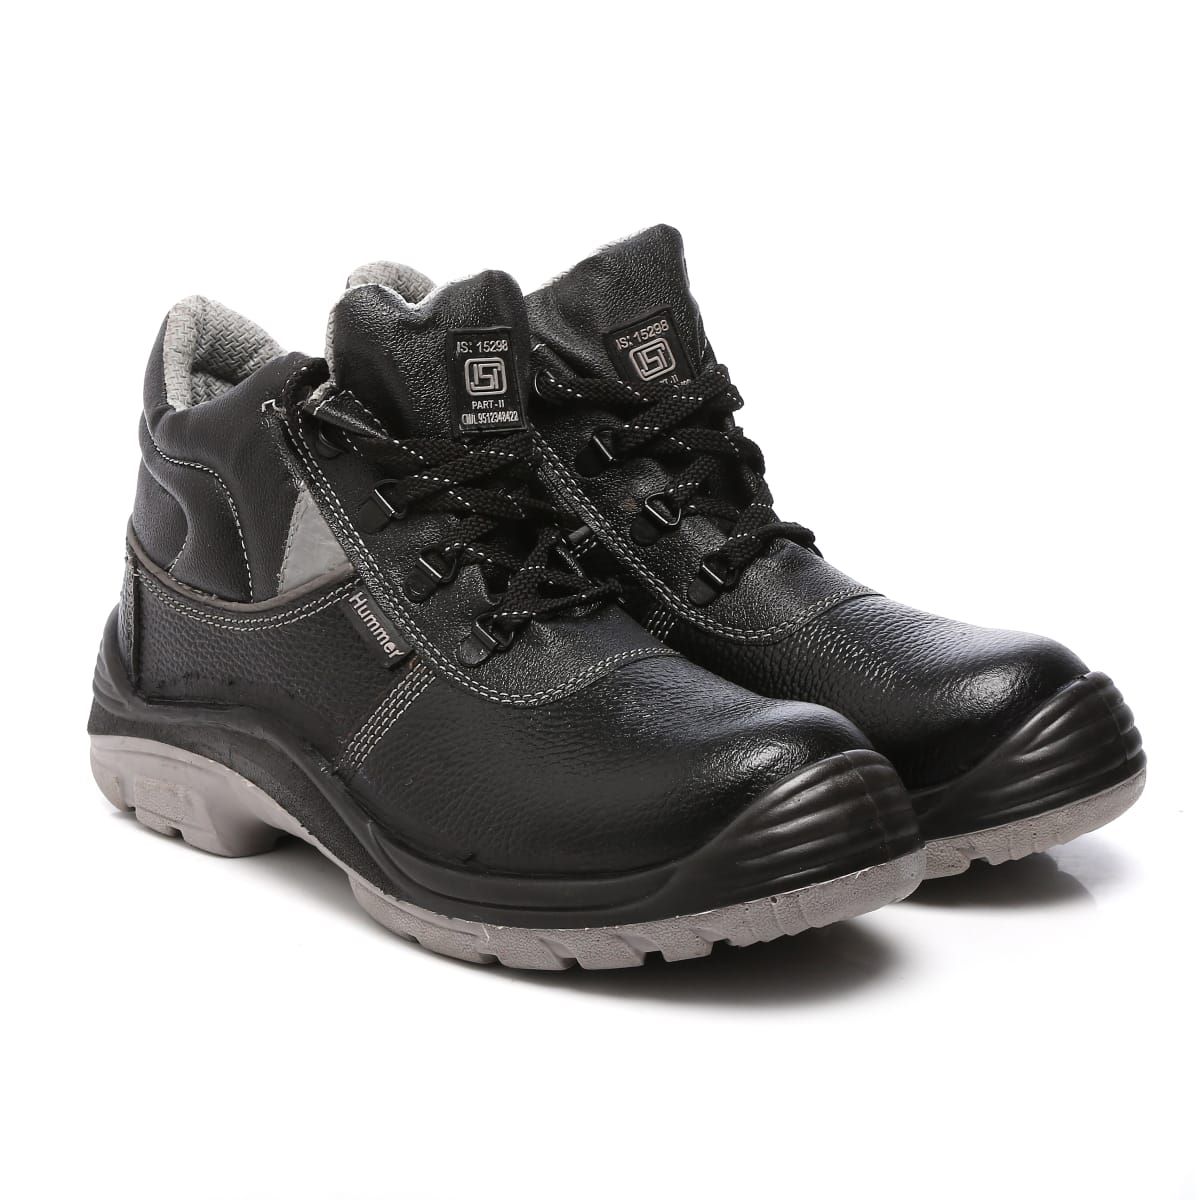 Hillson Agarson Safety Shoes at Rs 285 in Nagpur | ID: 16263047391